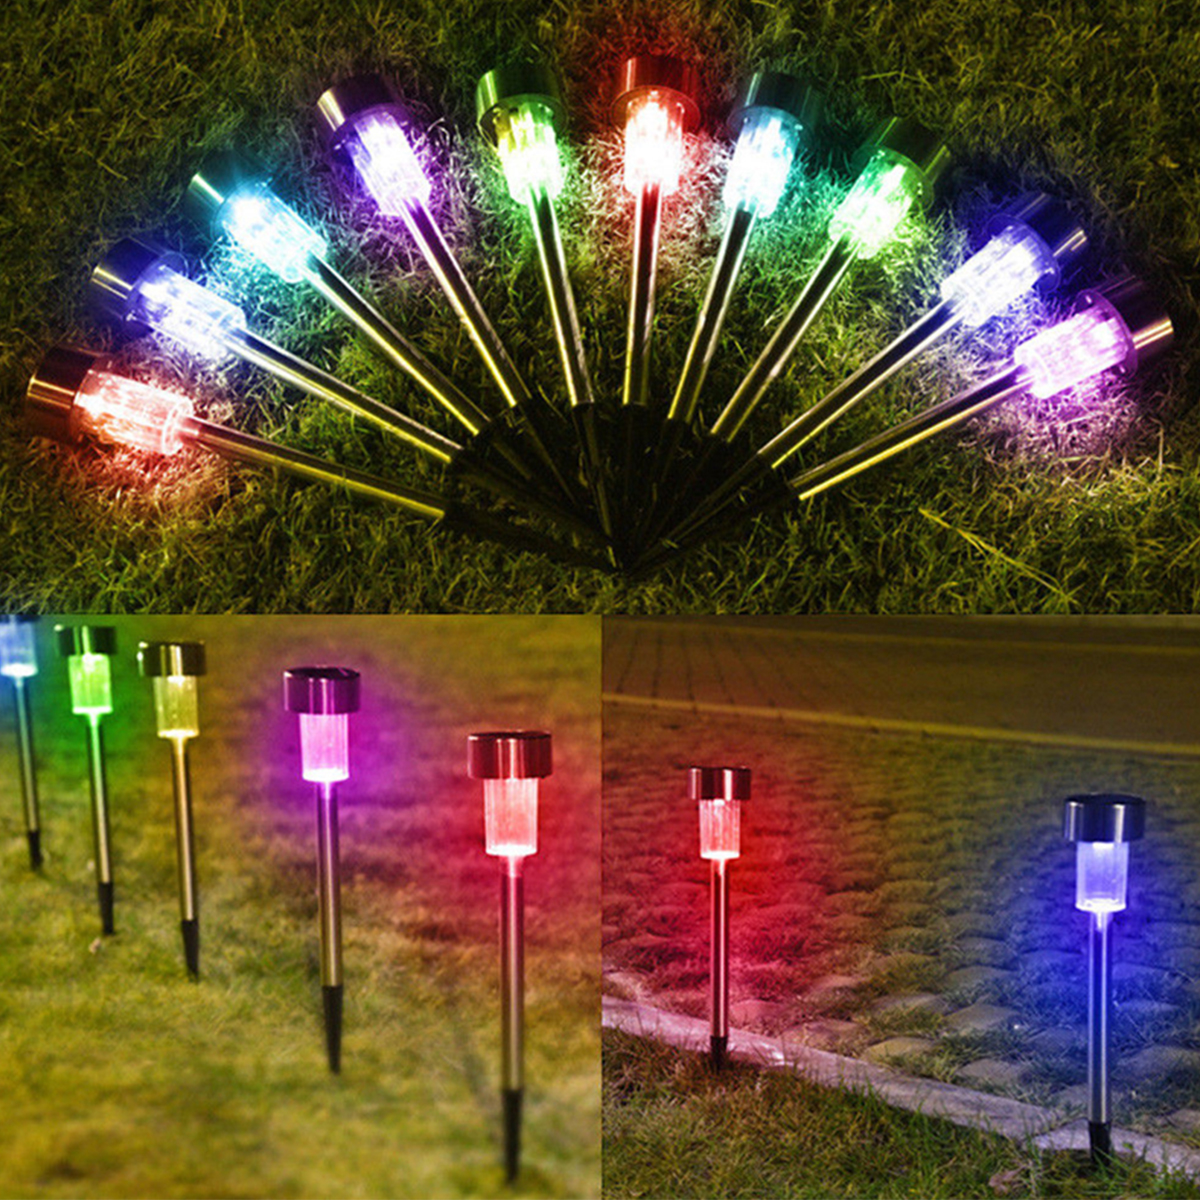 Find 12PCS Solar Lights Outdoor Pathway Garden Stainless Steel LED Lights Waterproof Landscape Lighting Lawn Patio Yard Walkway Driveway for Sale on Gipsybee.com with cryptocurrencies